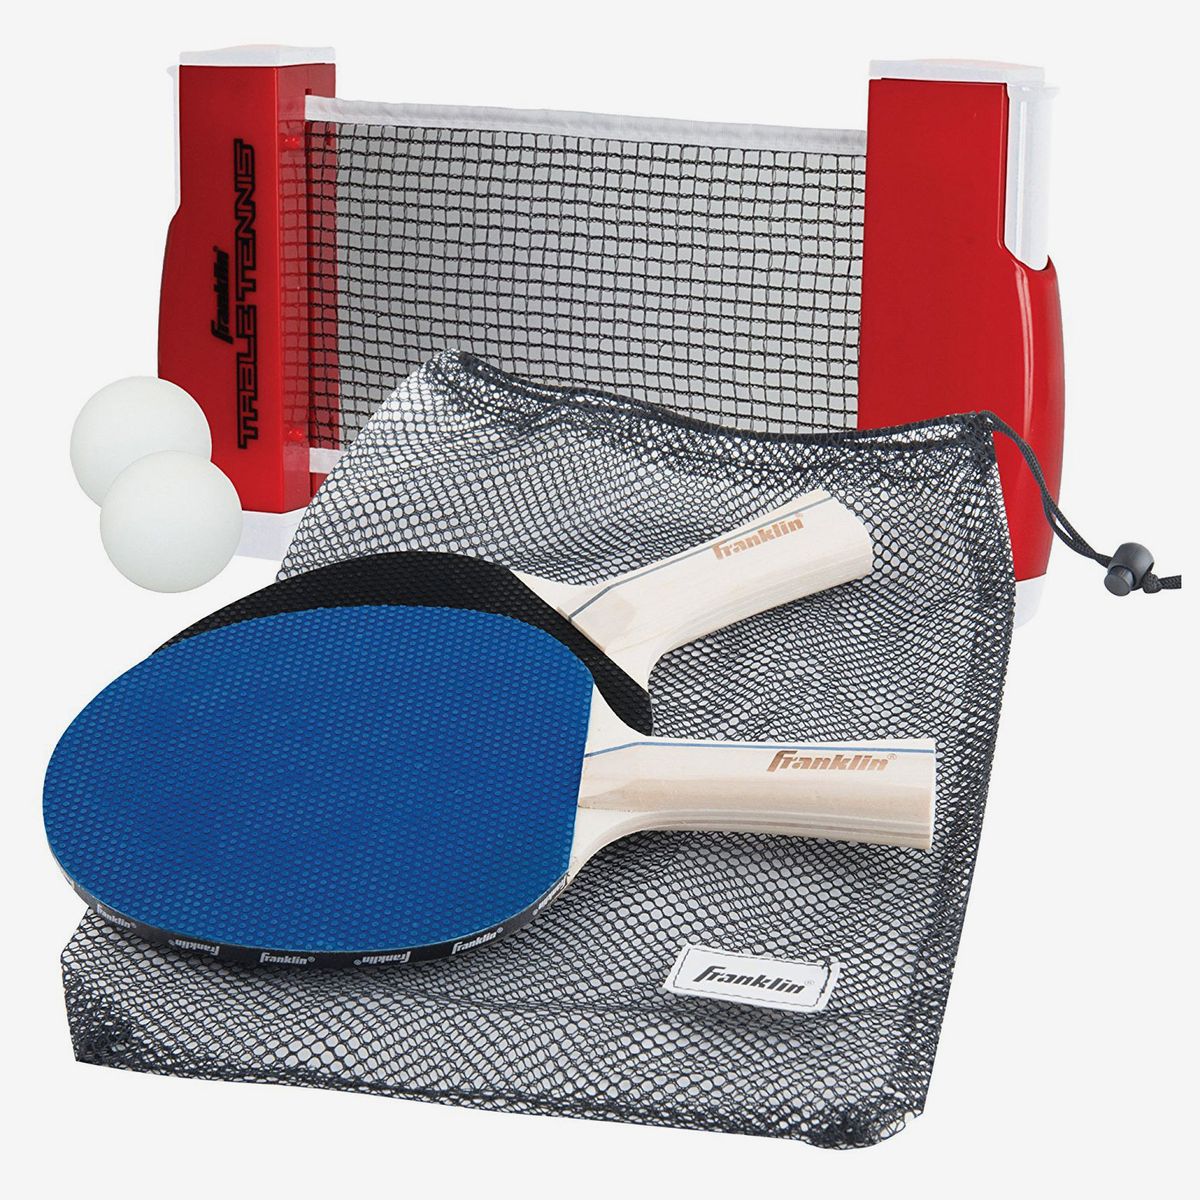 Extendable Net Christmas Gift Idea New Fits Most Tables Table Tennis Set 